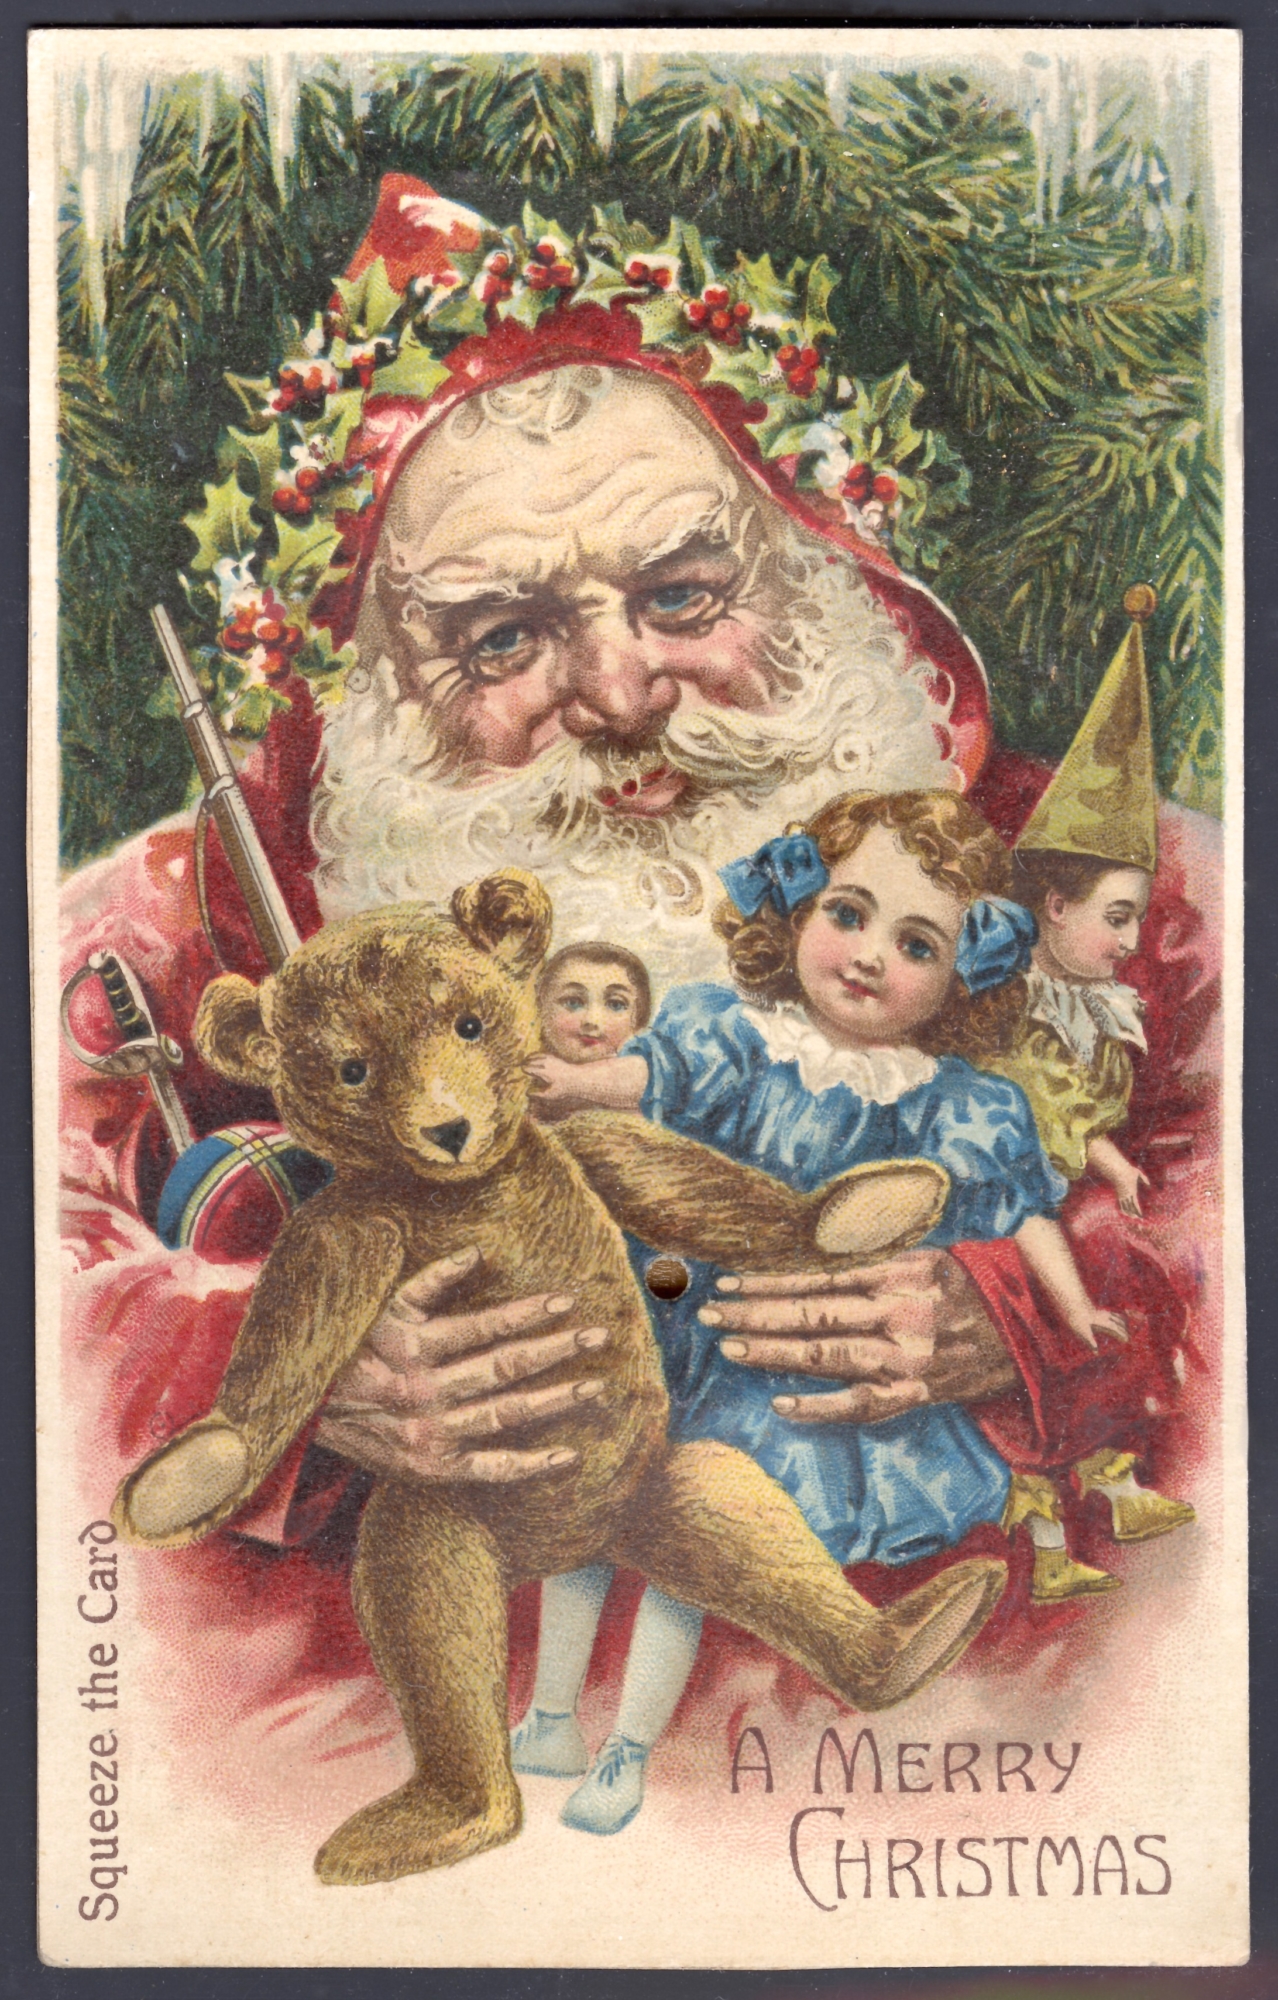 Santa wearing a red robe. Lithographed in Germany (squeaker)